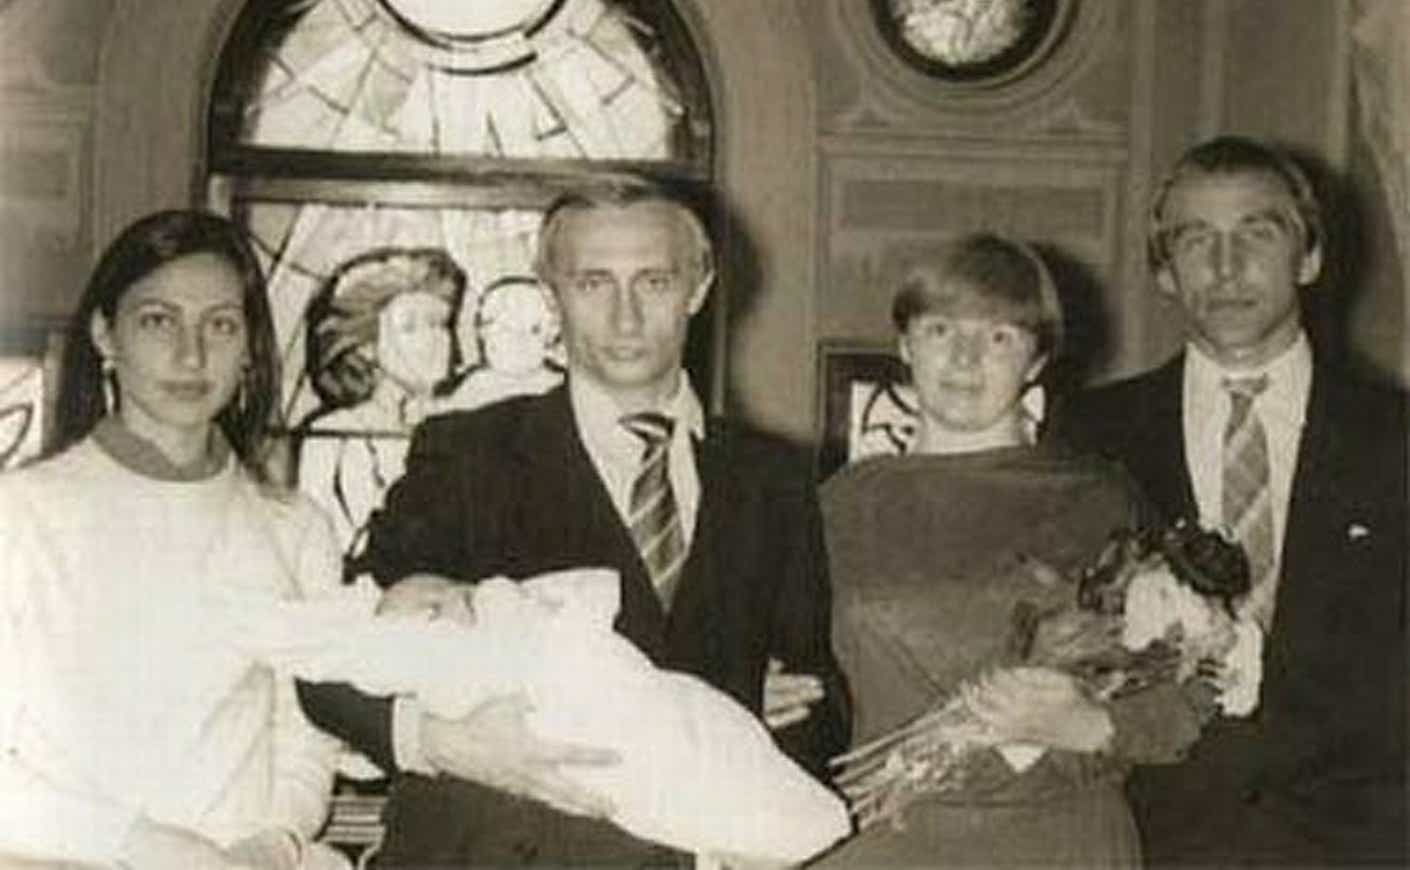 Young Vladimir Putin with his wife Lyudmila and daughter